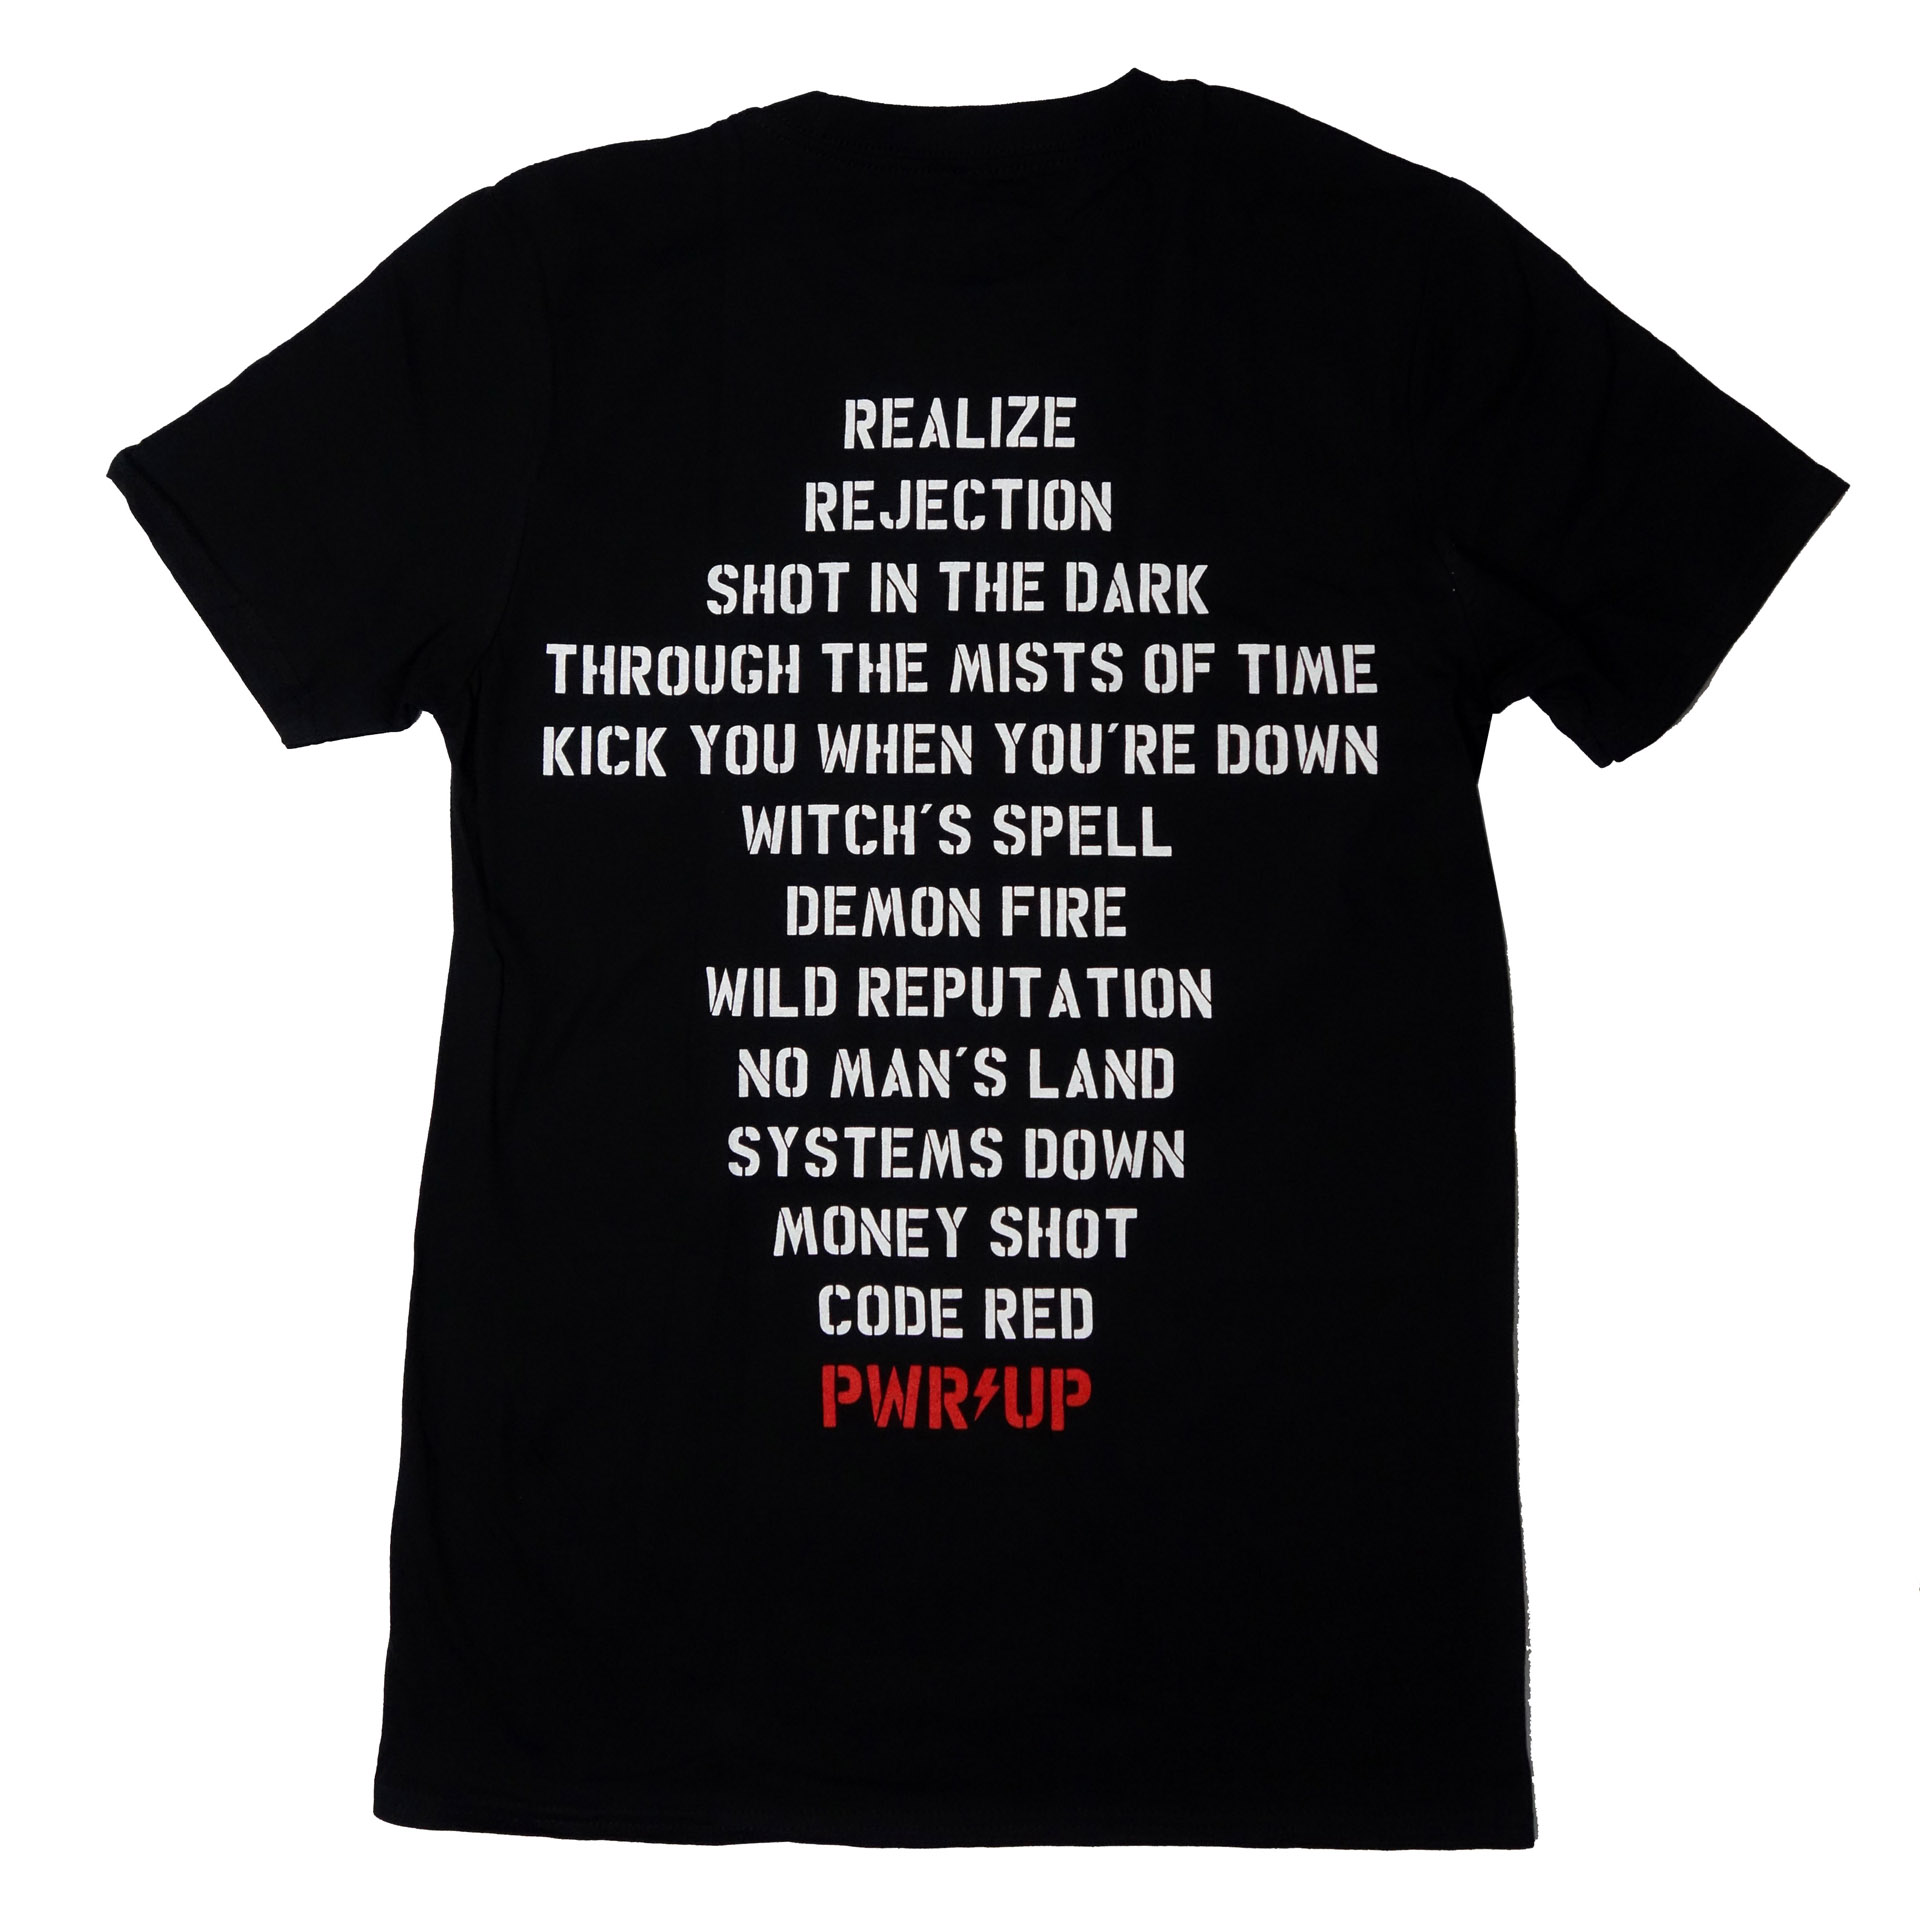 T-Shirt AC/DC Power Up Stage/ Tracklist